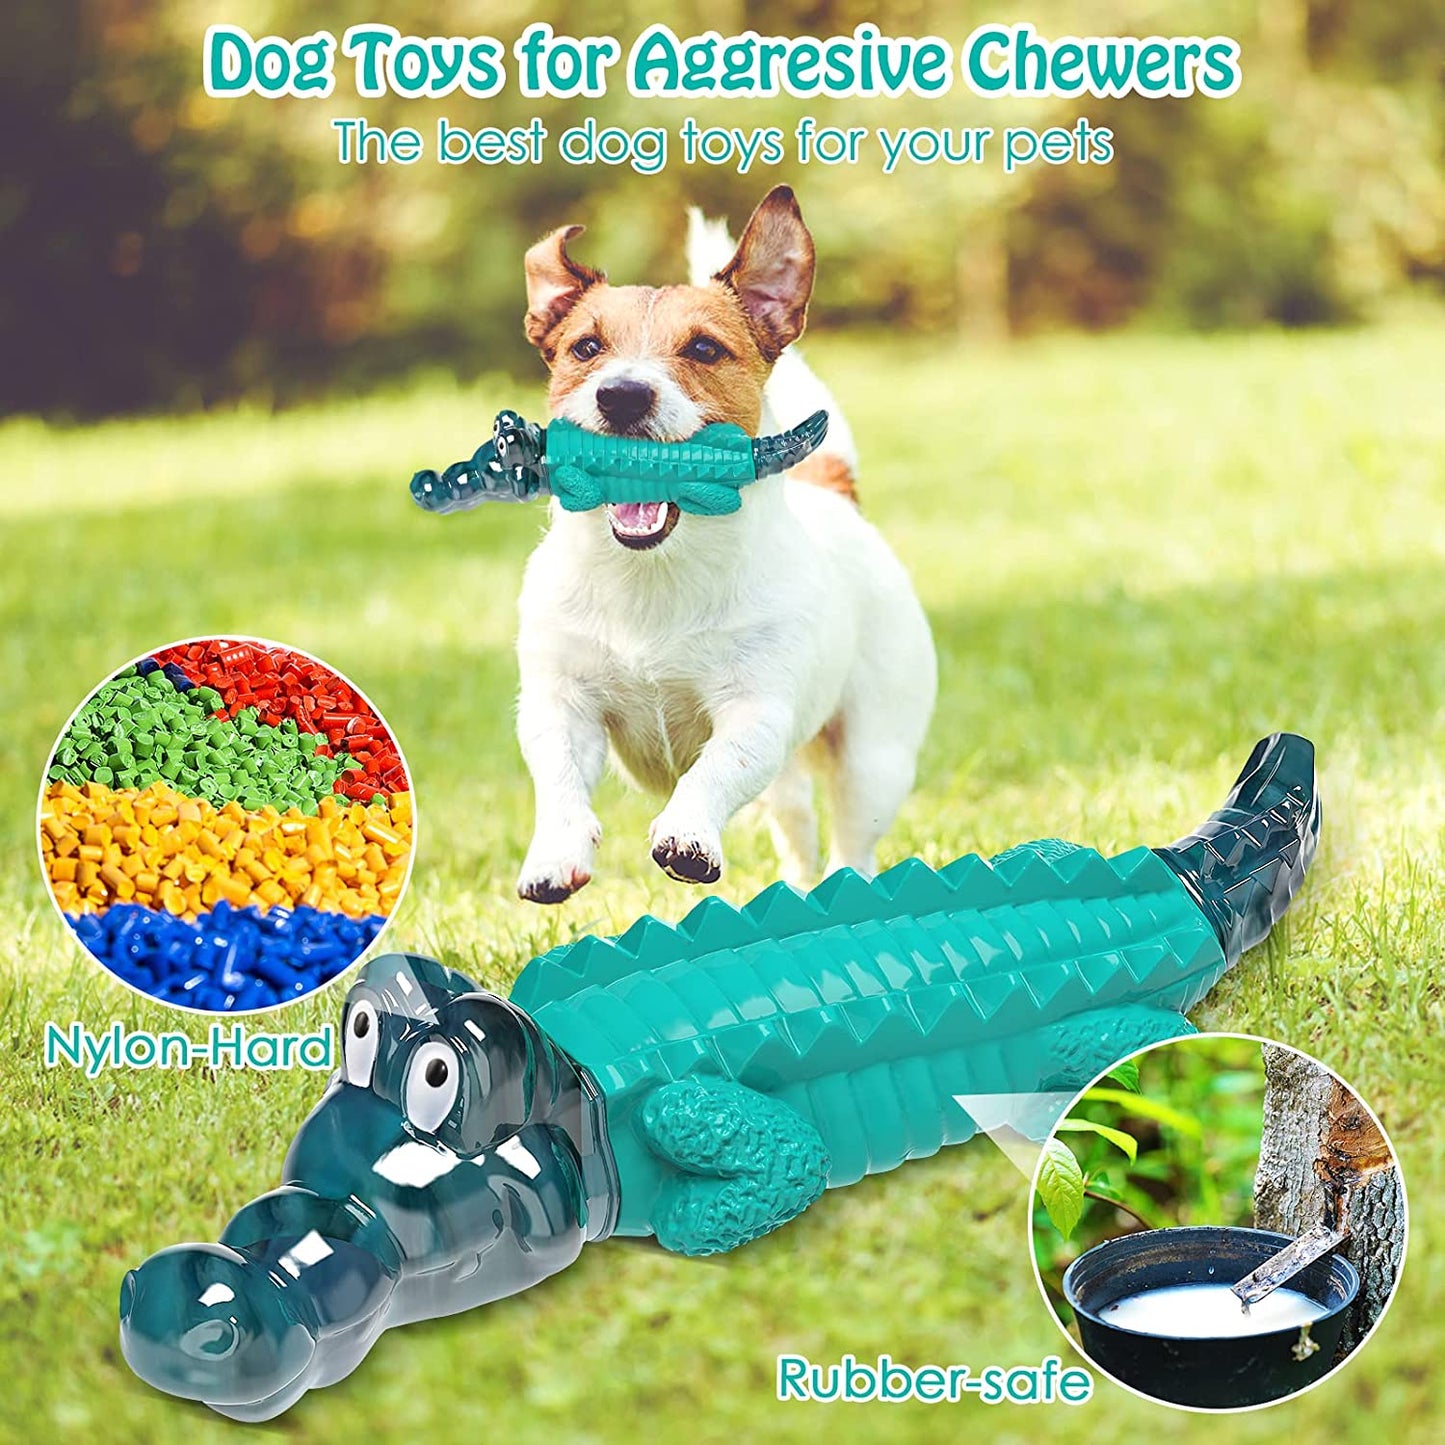 Dog Toys for Super Aggresive Chewers/Tough Dog Toys/Heavy Duty/Durable Toys for Large/Medium Dogs to Keep Them Busy